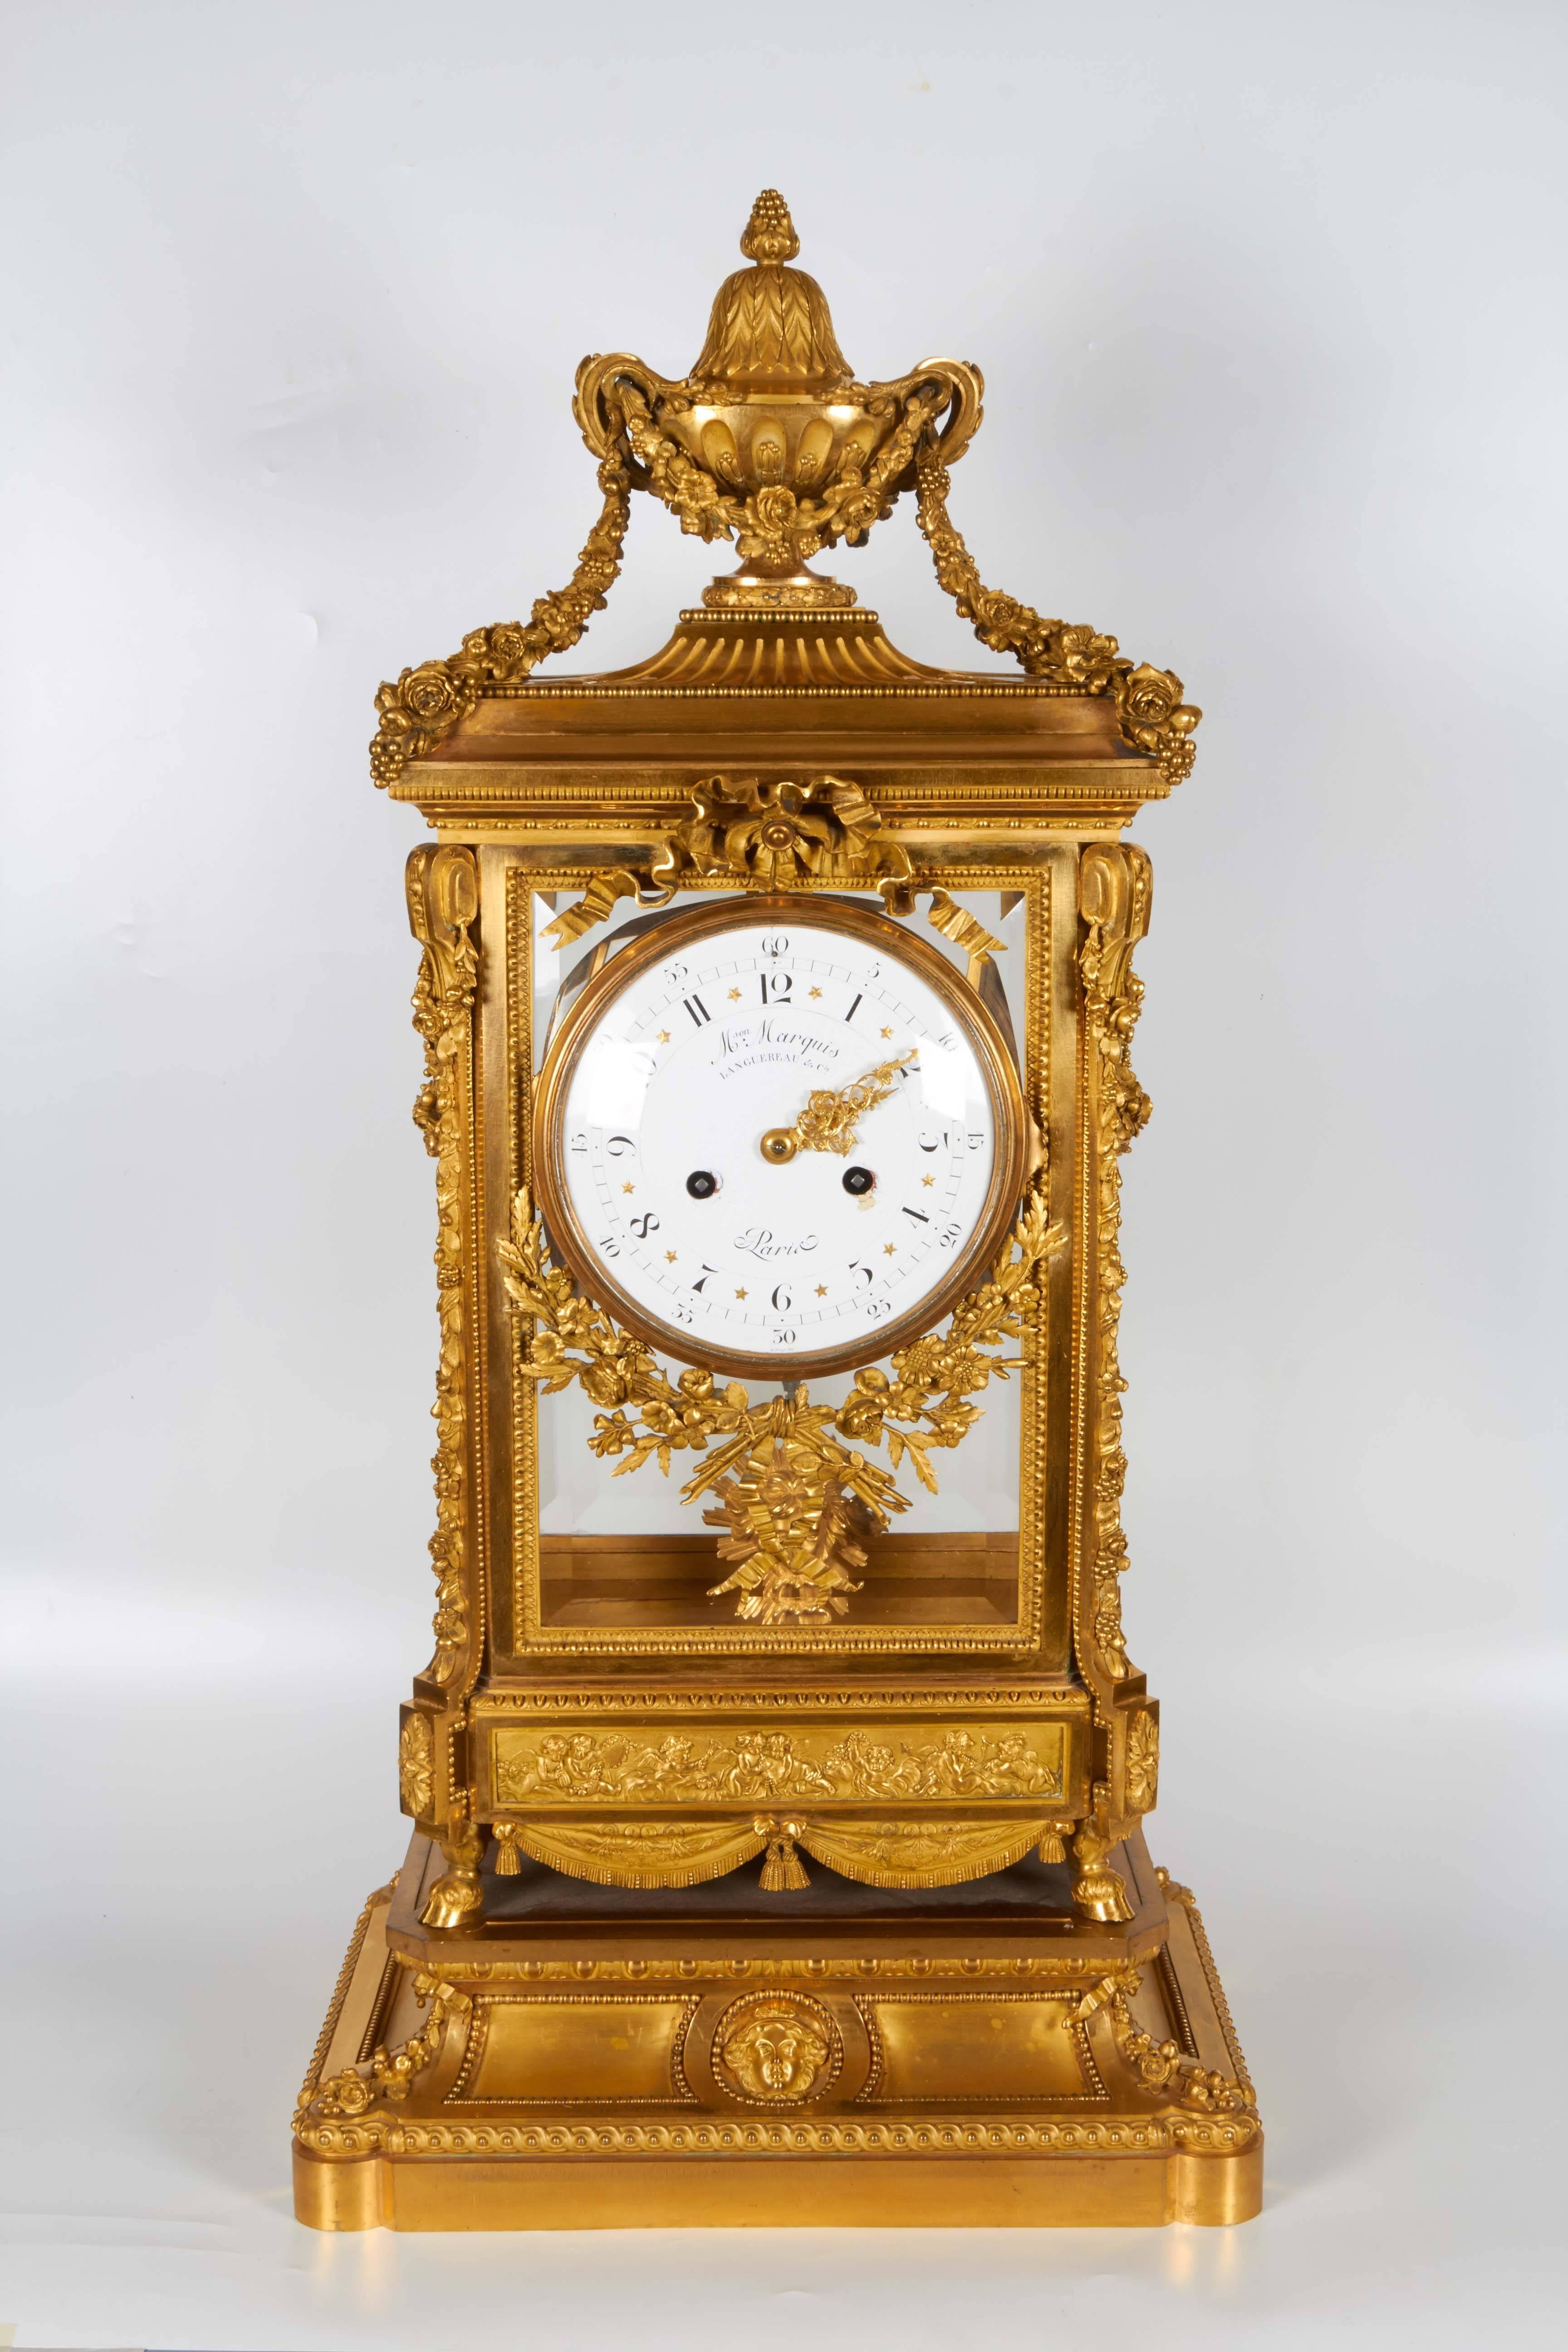 A very unusual and quite monumental antique French Louis XVI style Napoleon III ormolu mantel clock by Maison Marquis, the Movement by Languereau, Paris, 1860: surmounted by an urn issuing flower swags, the rectangular body with beveled glazed front